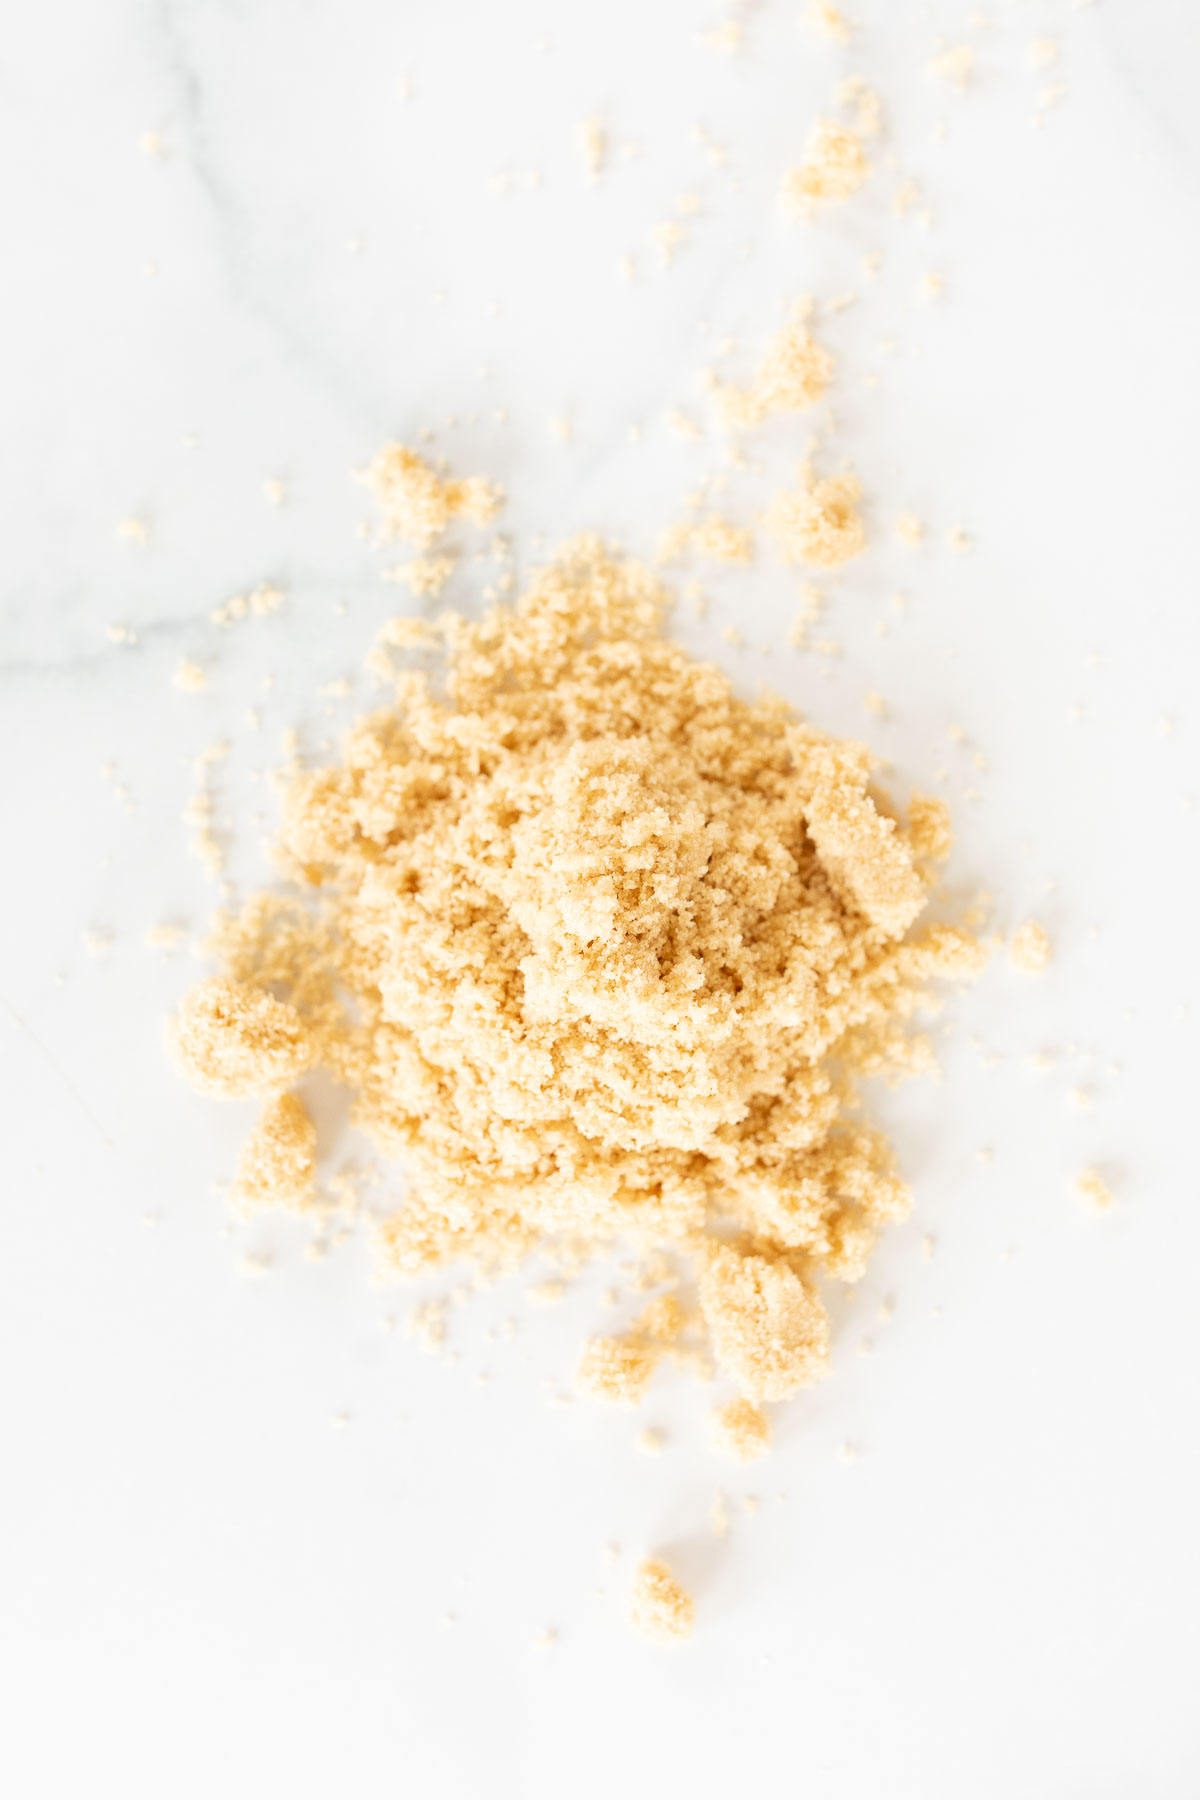 Light brown sugar piled on a white surface.